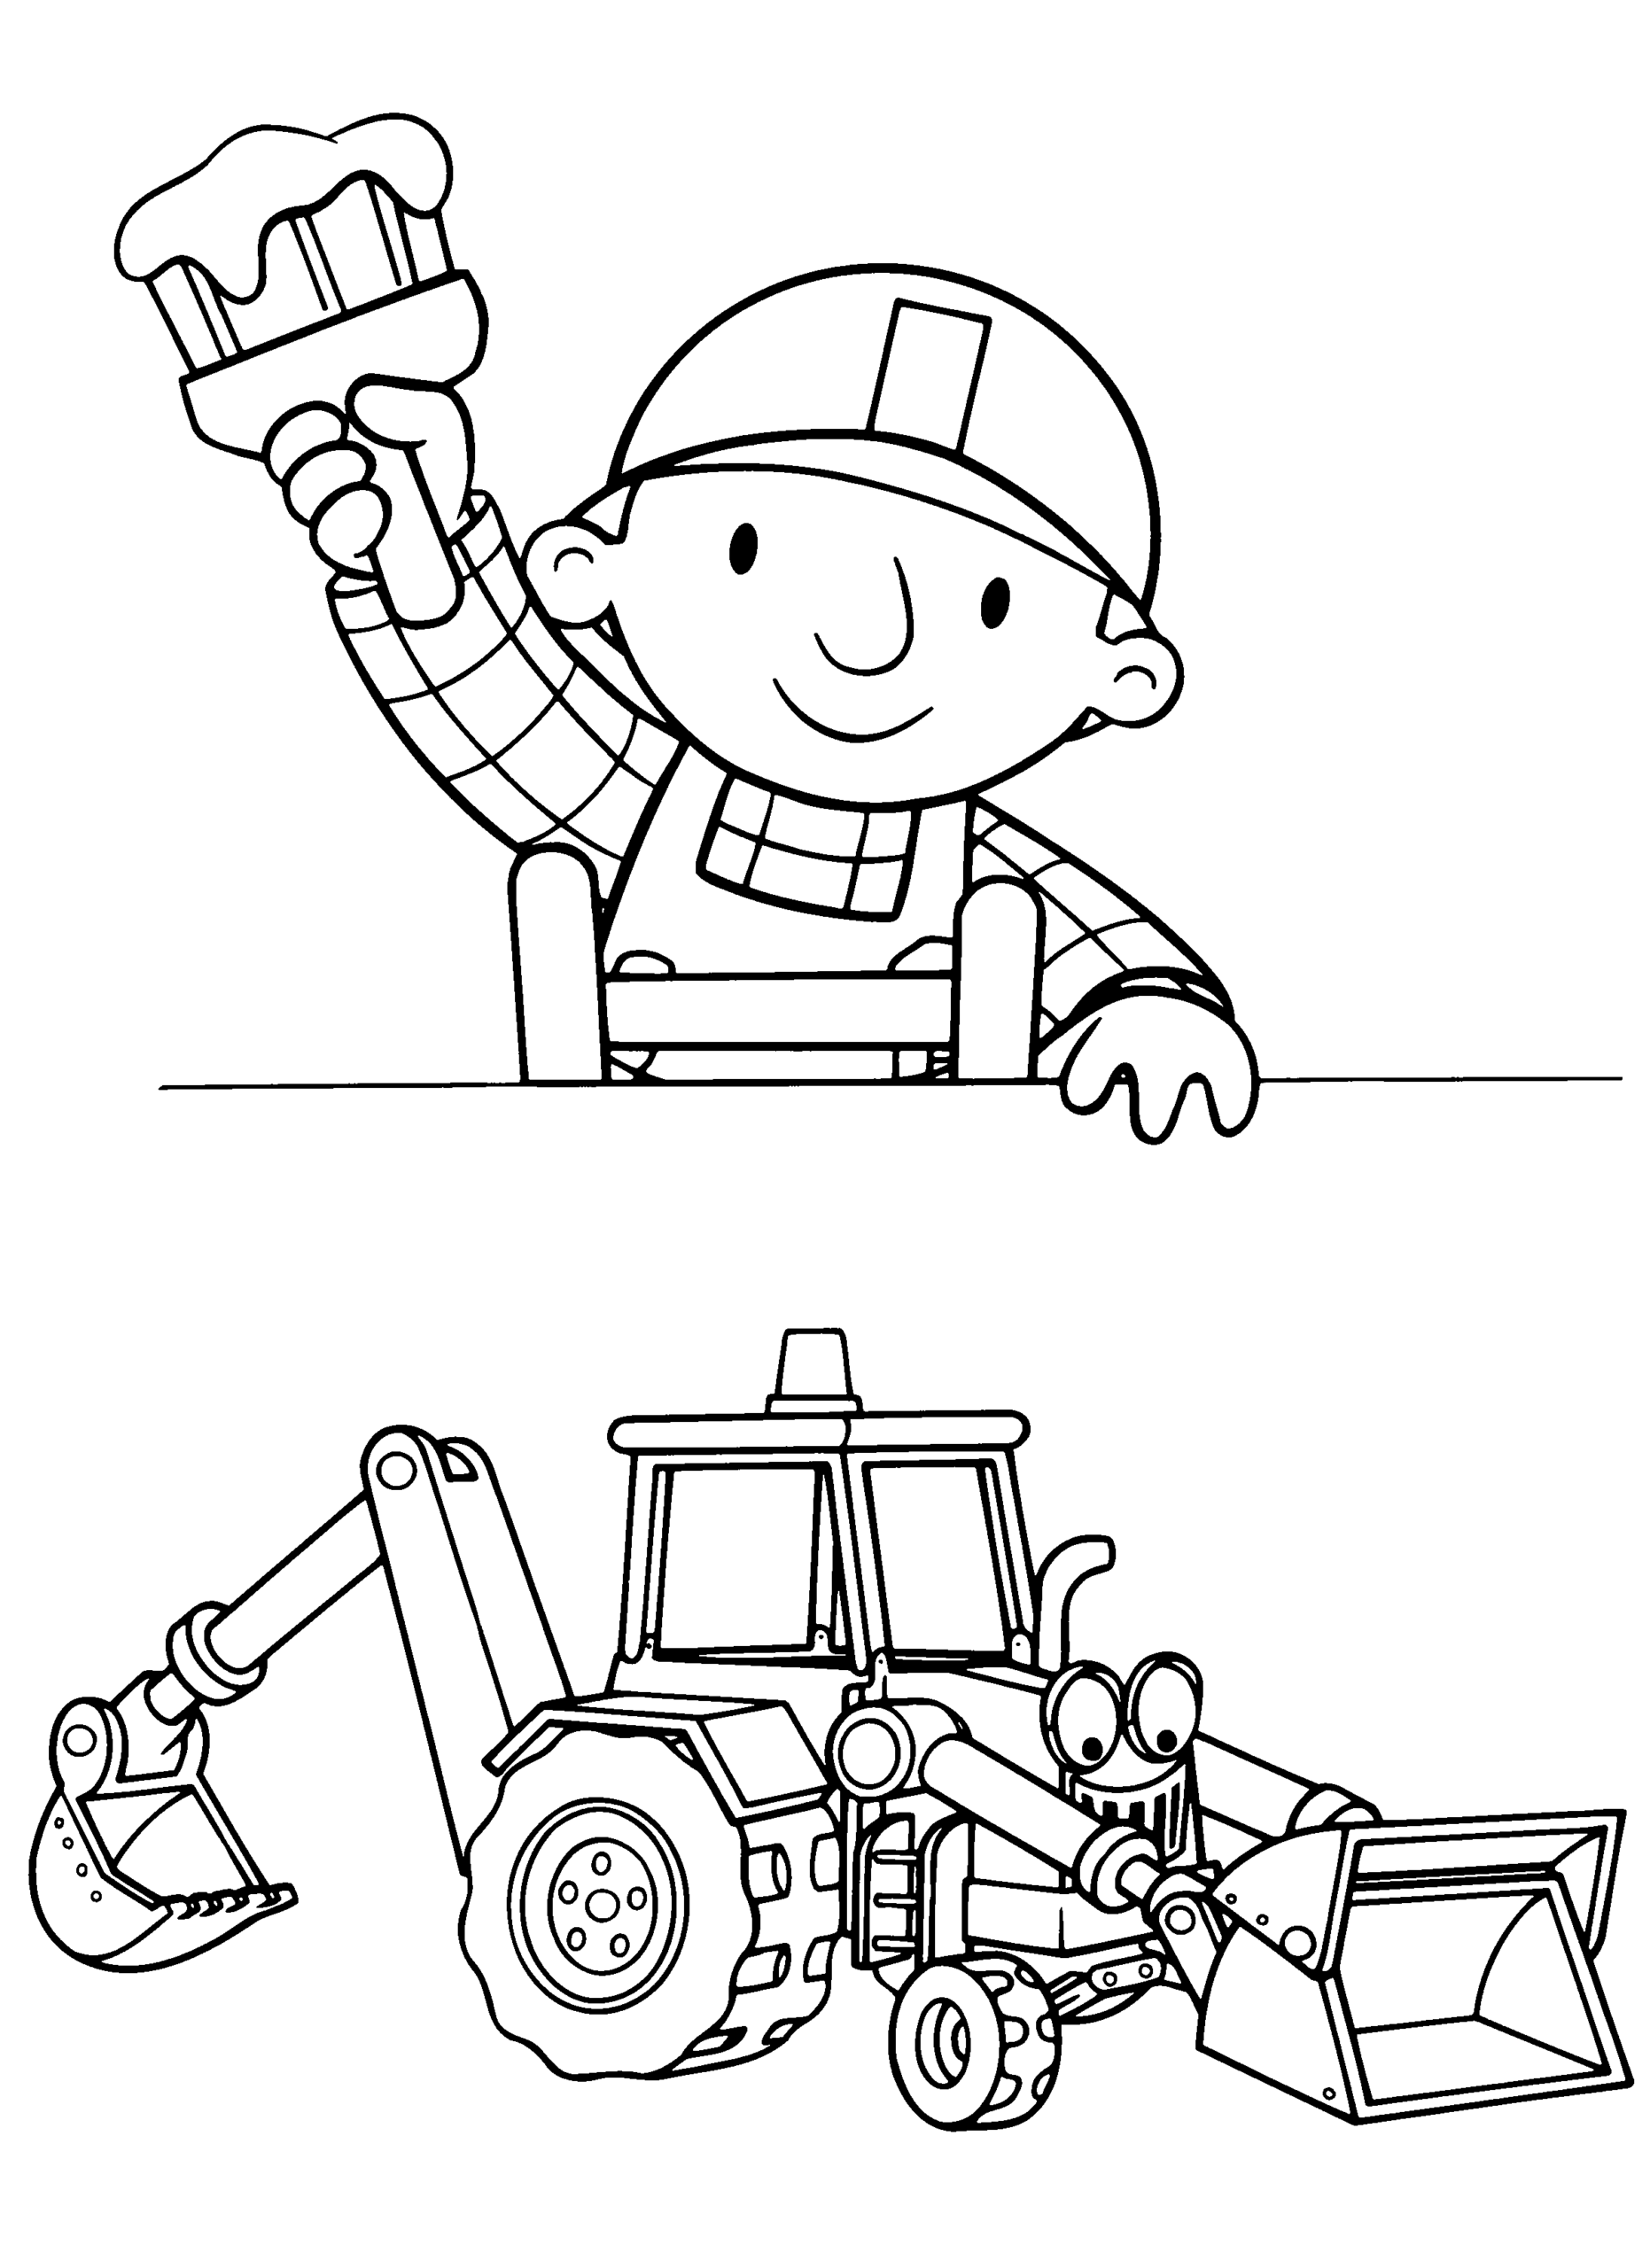 Bob the Builder Coloring Pages TV Film bob the builder 42 Printable 2020 01061 Coloring4free